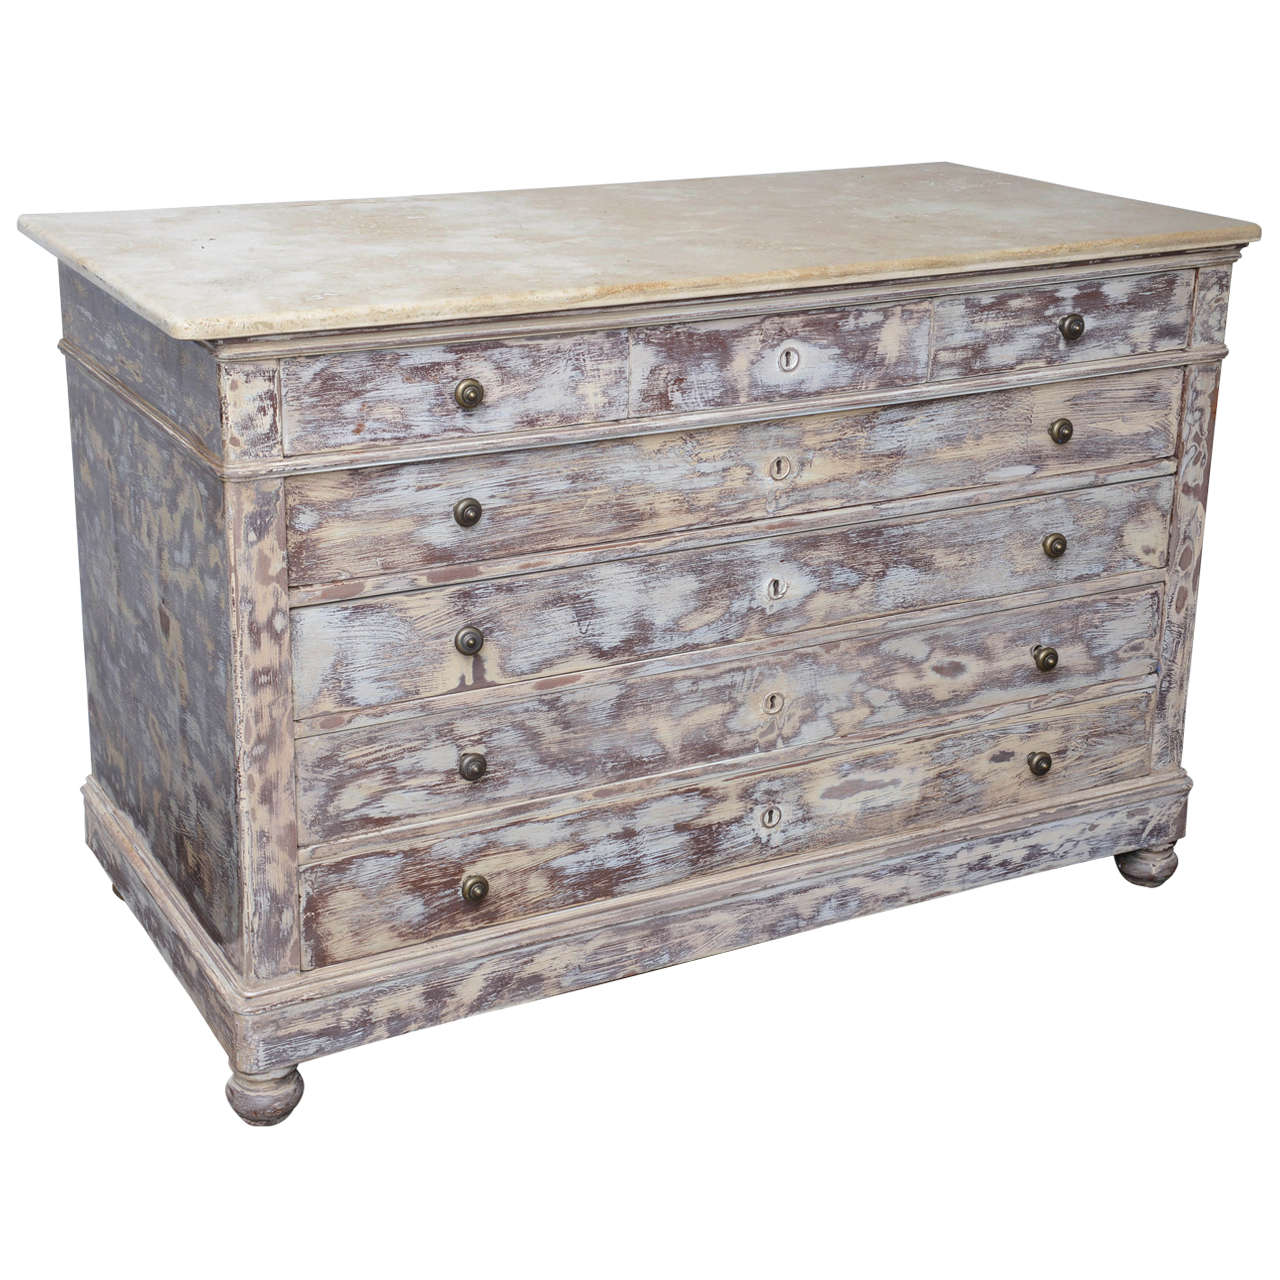 19th Century French Hand-Painted Marble-Top Chest of Drawers